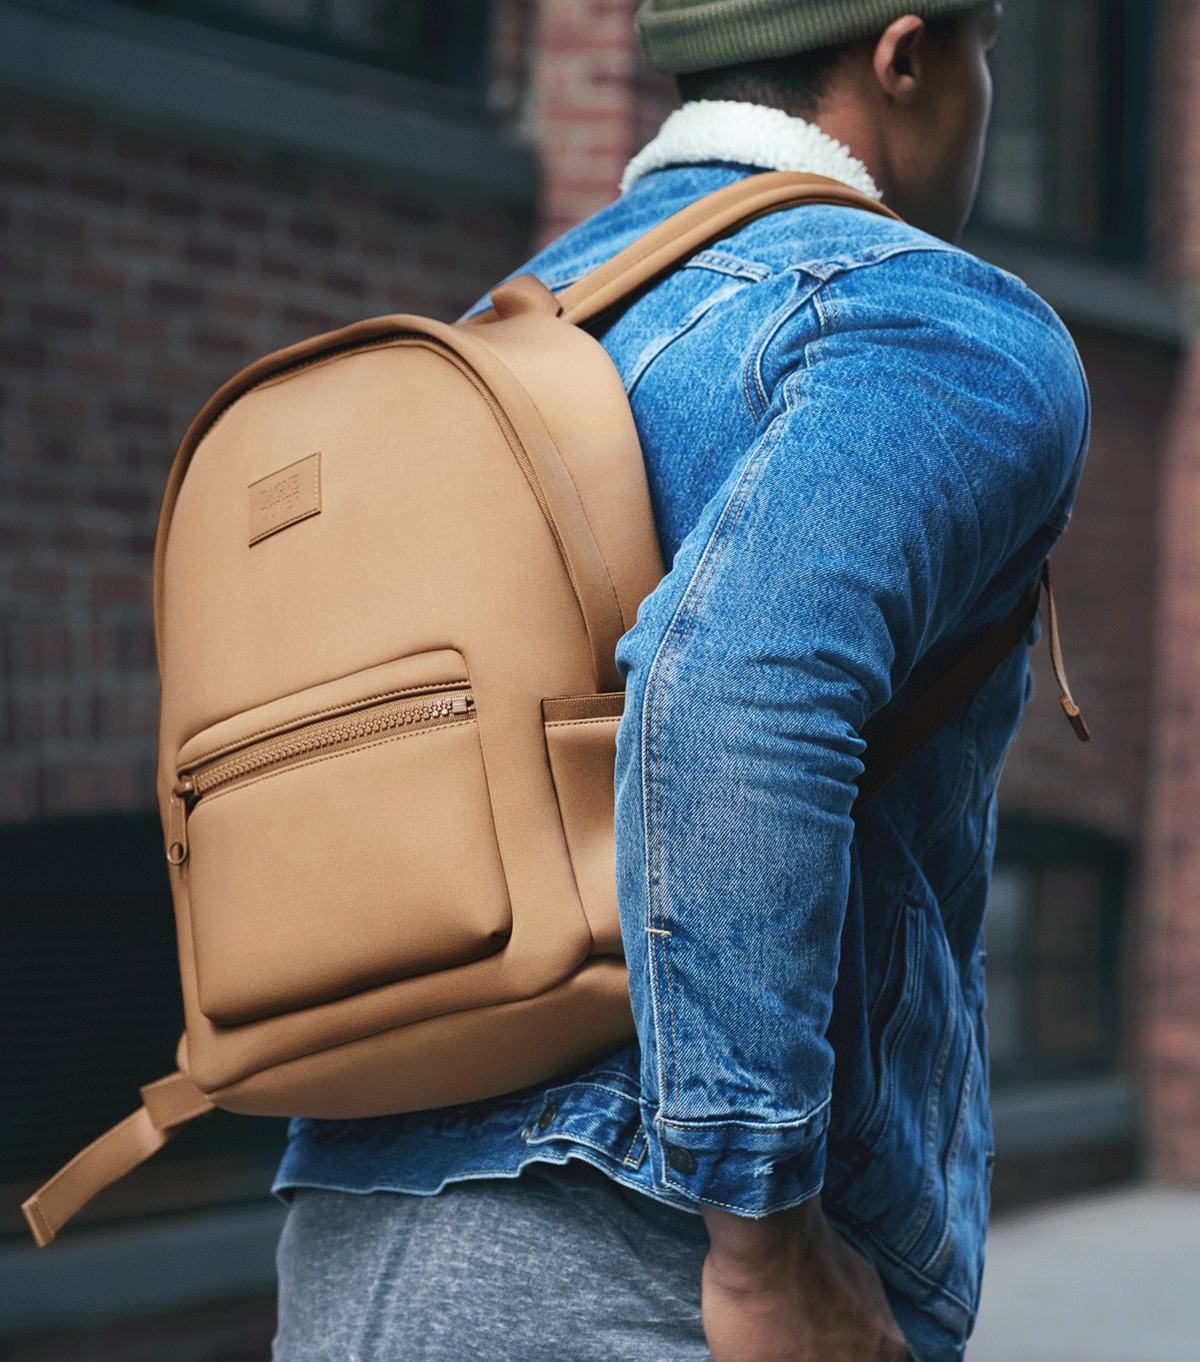 Dagne Dover - We've finally launched our favorite computer bags in NEW  colors! Dune and Ash Blue are now available on the site - you know what to  do. Tap for deets.